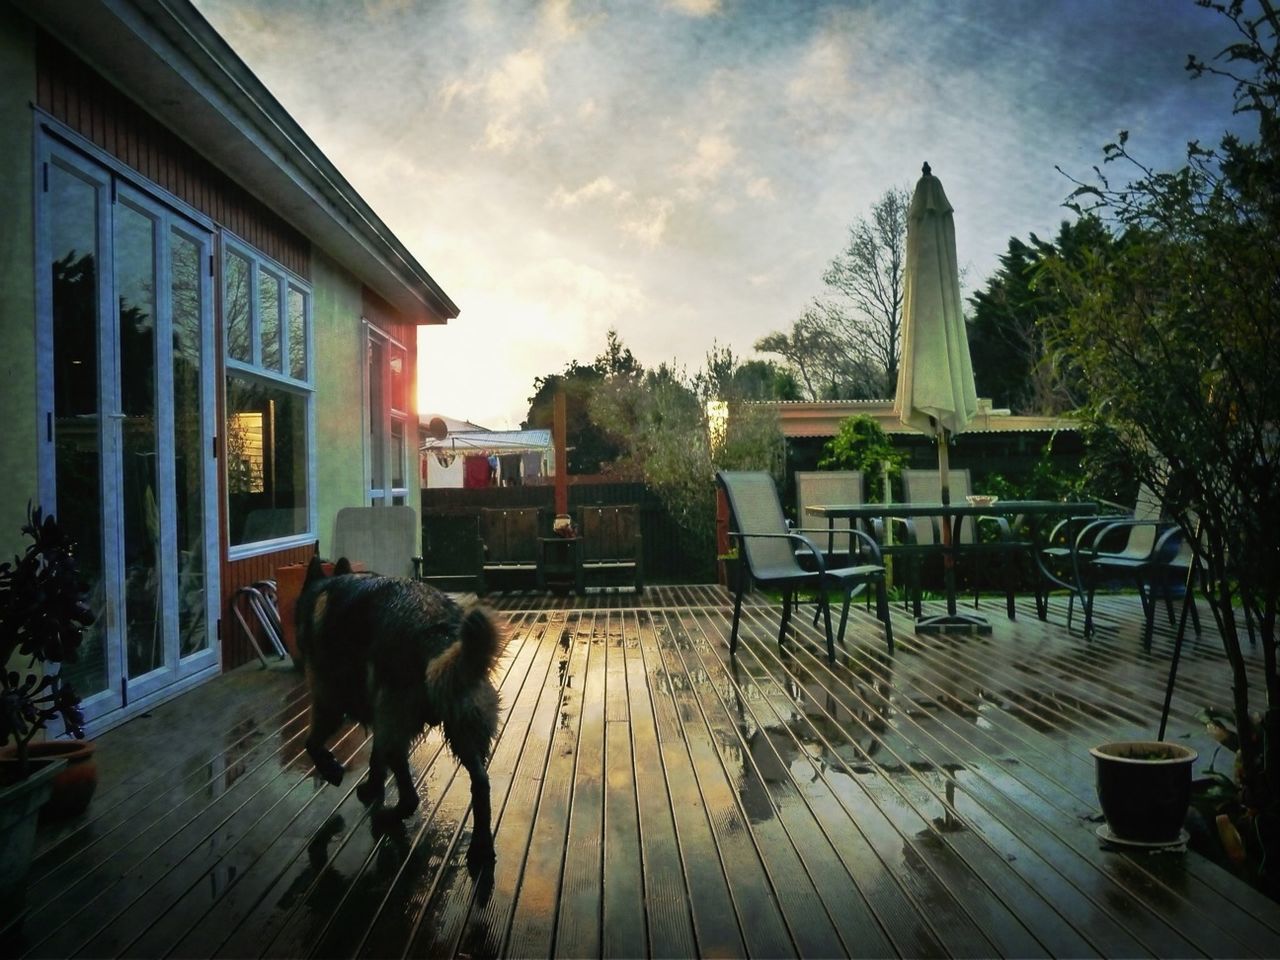 Dog on wet porch against cloudy sky